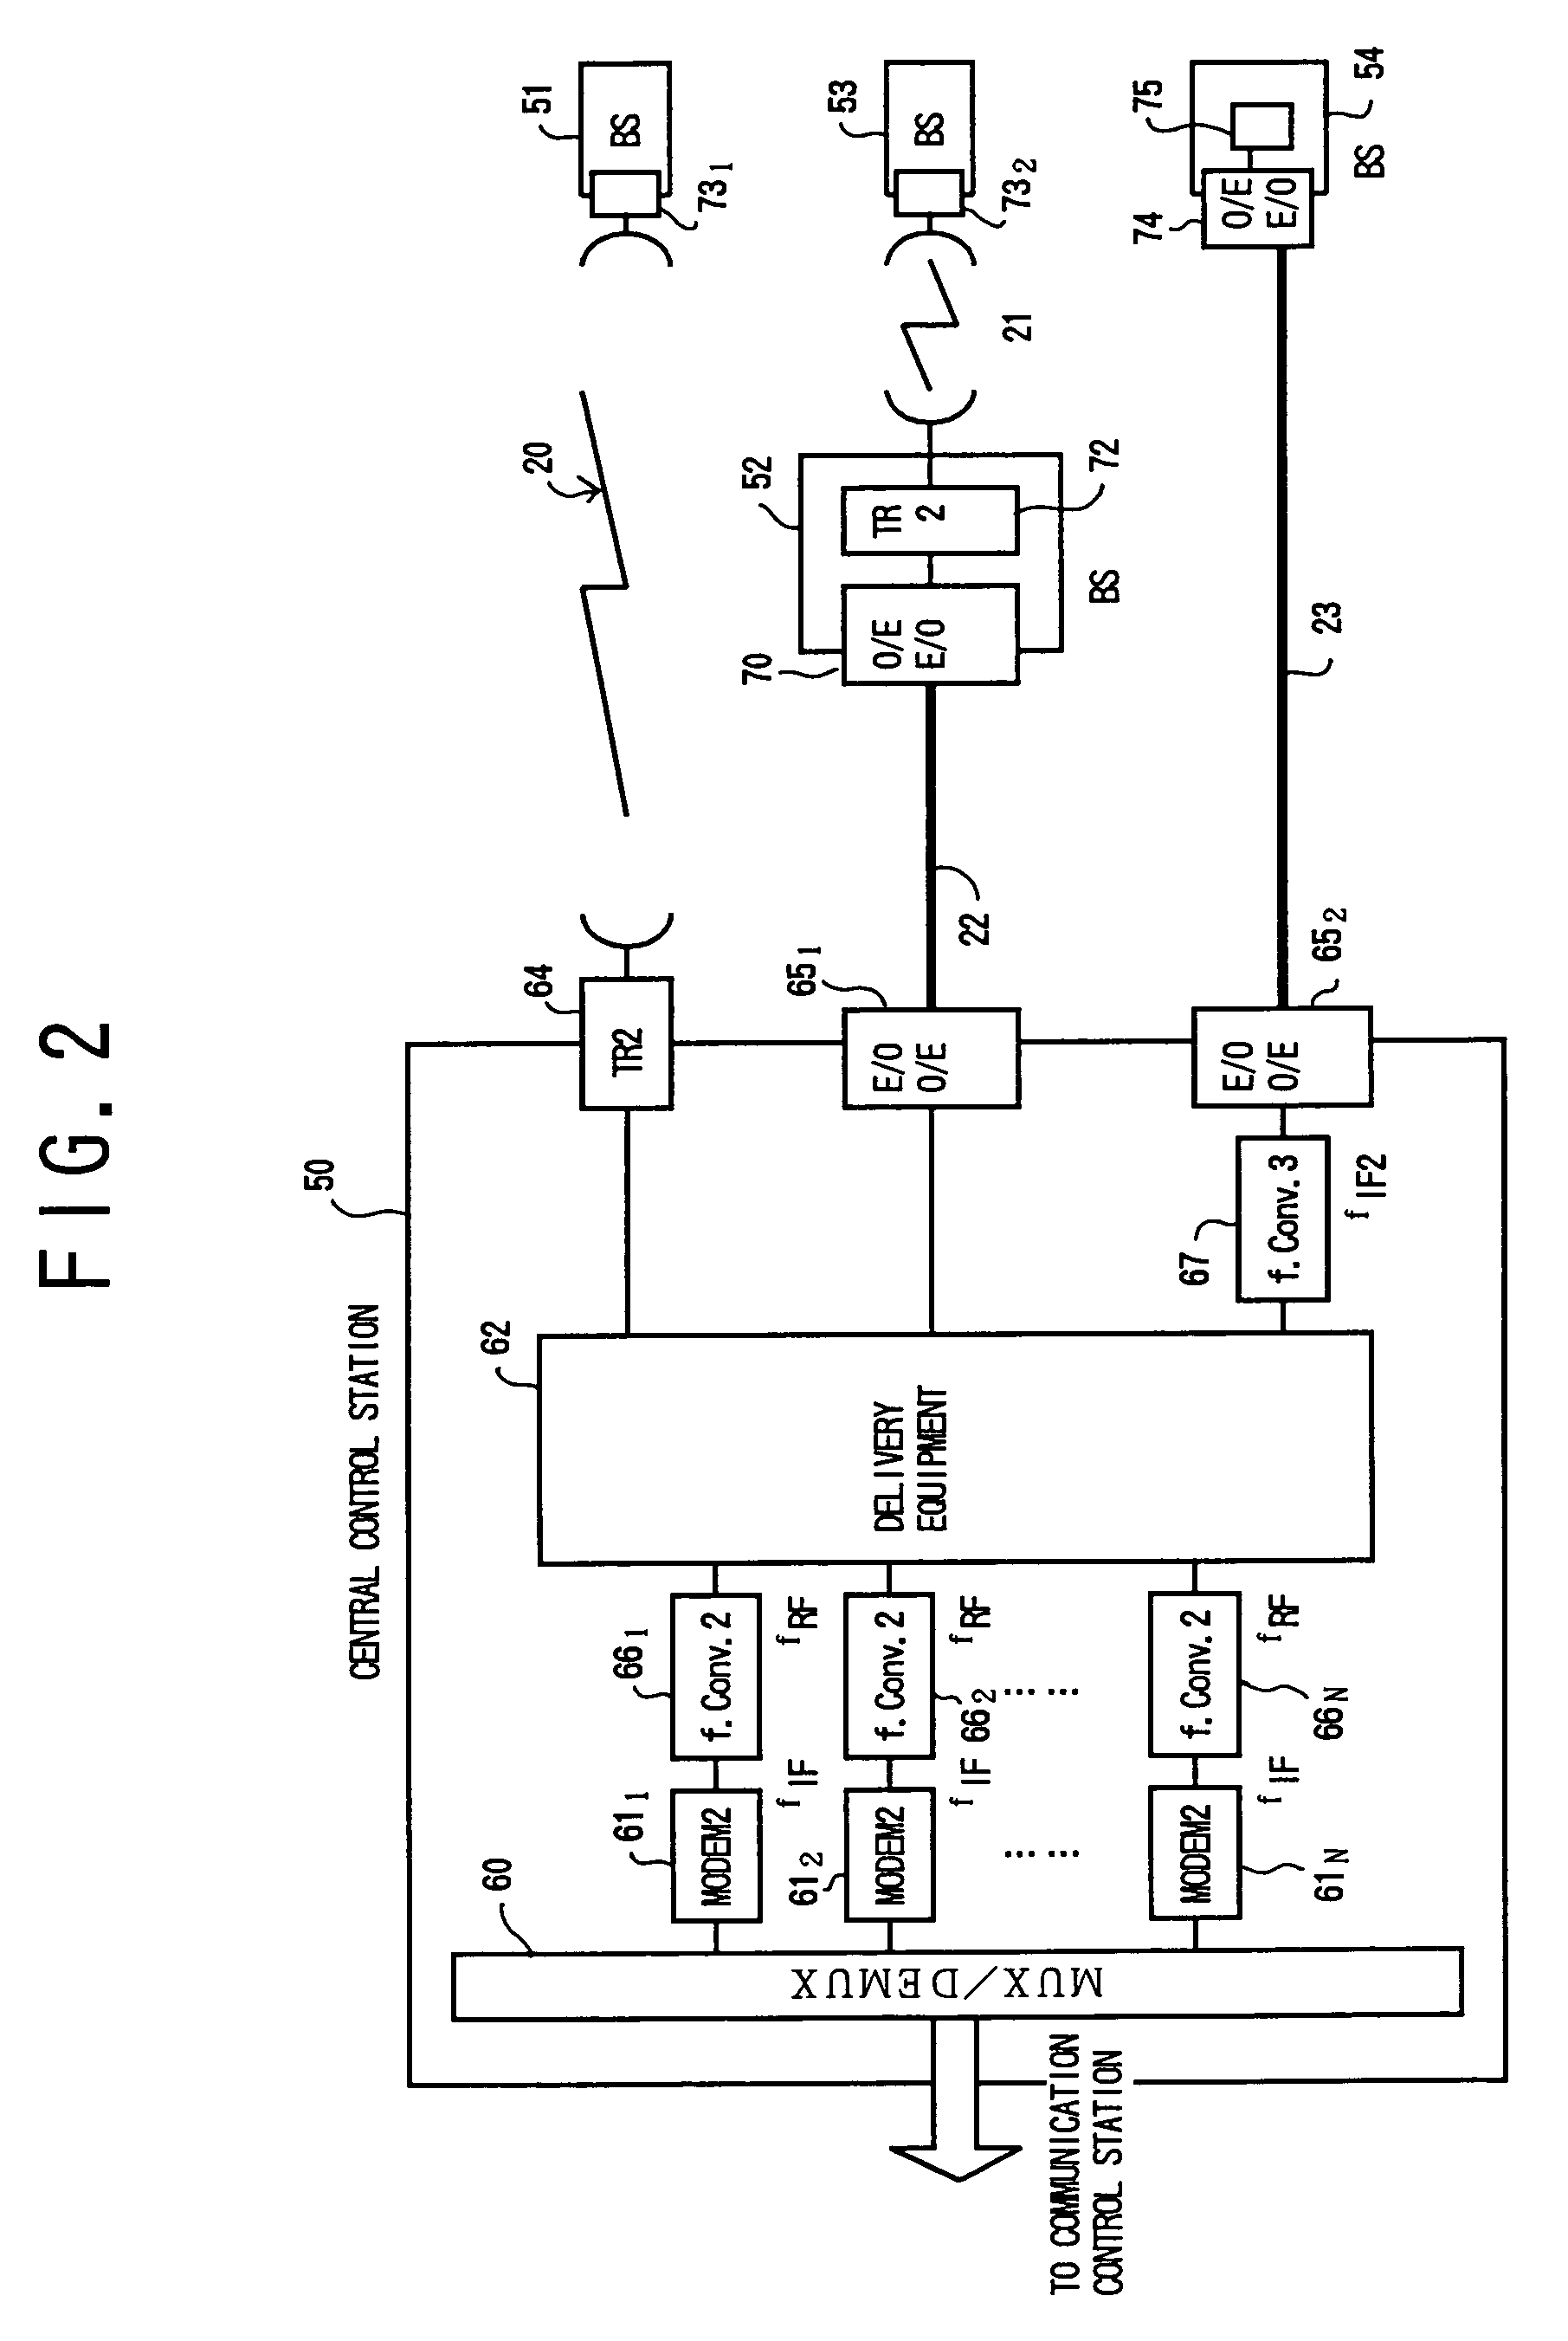 Radio base station system and central control station with unified transmission format